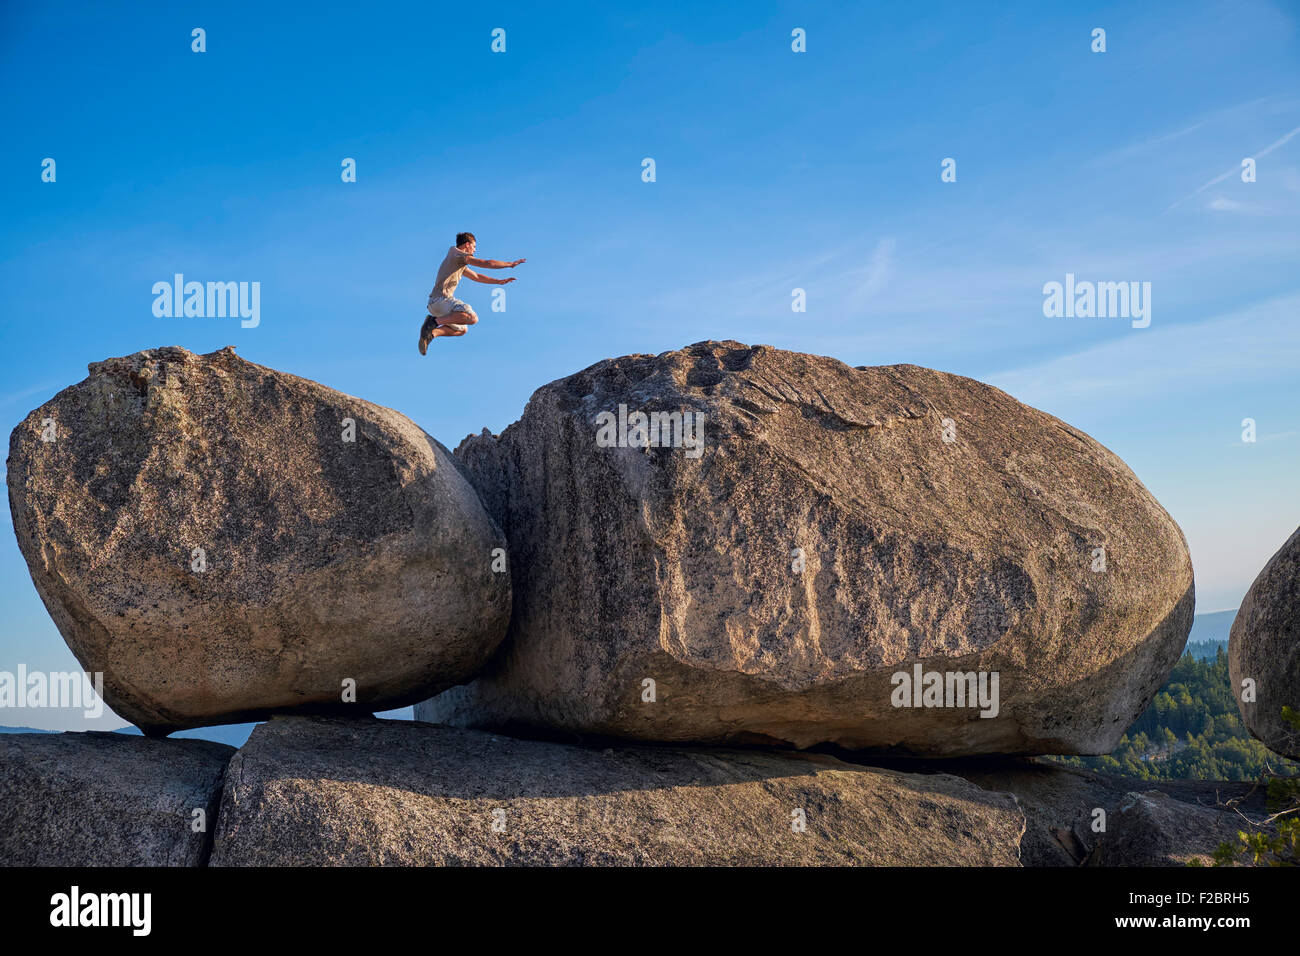 Teenage boy in a remote location in Northern California jumping from one large boulder to another one. Stock Photo